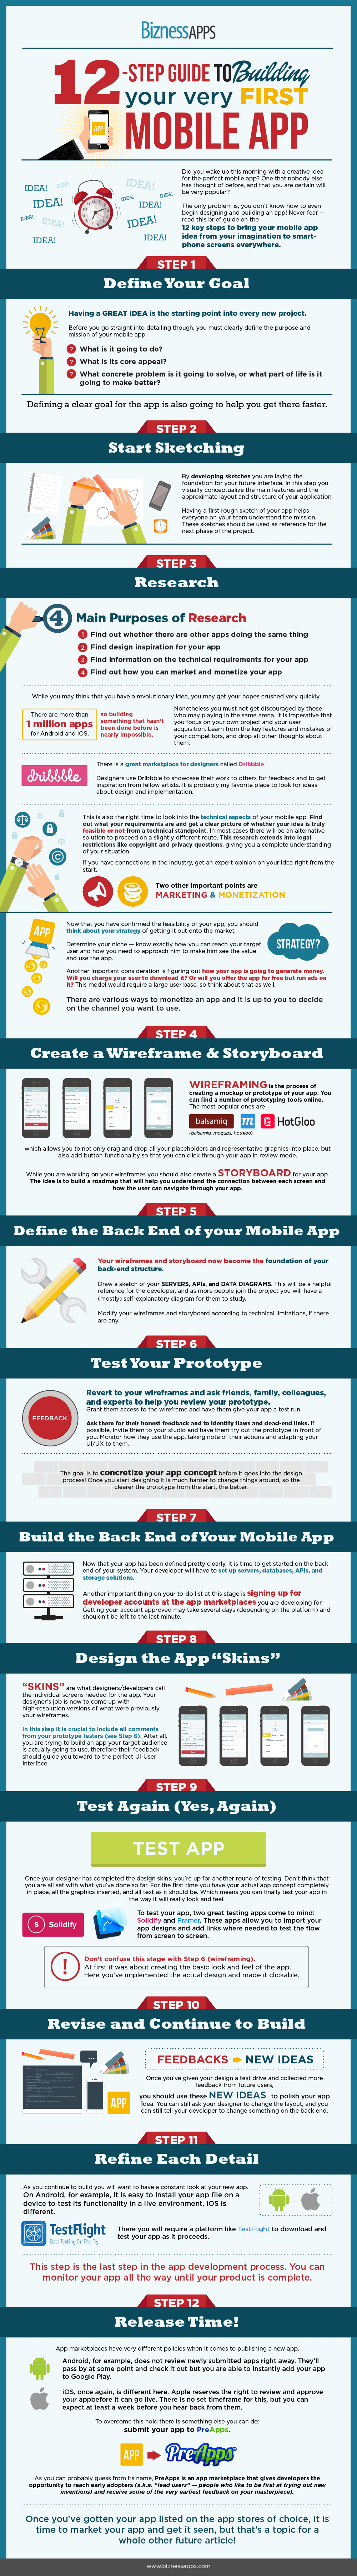 Infograph-on-Building-Mobile-App